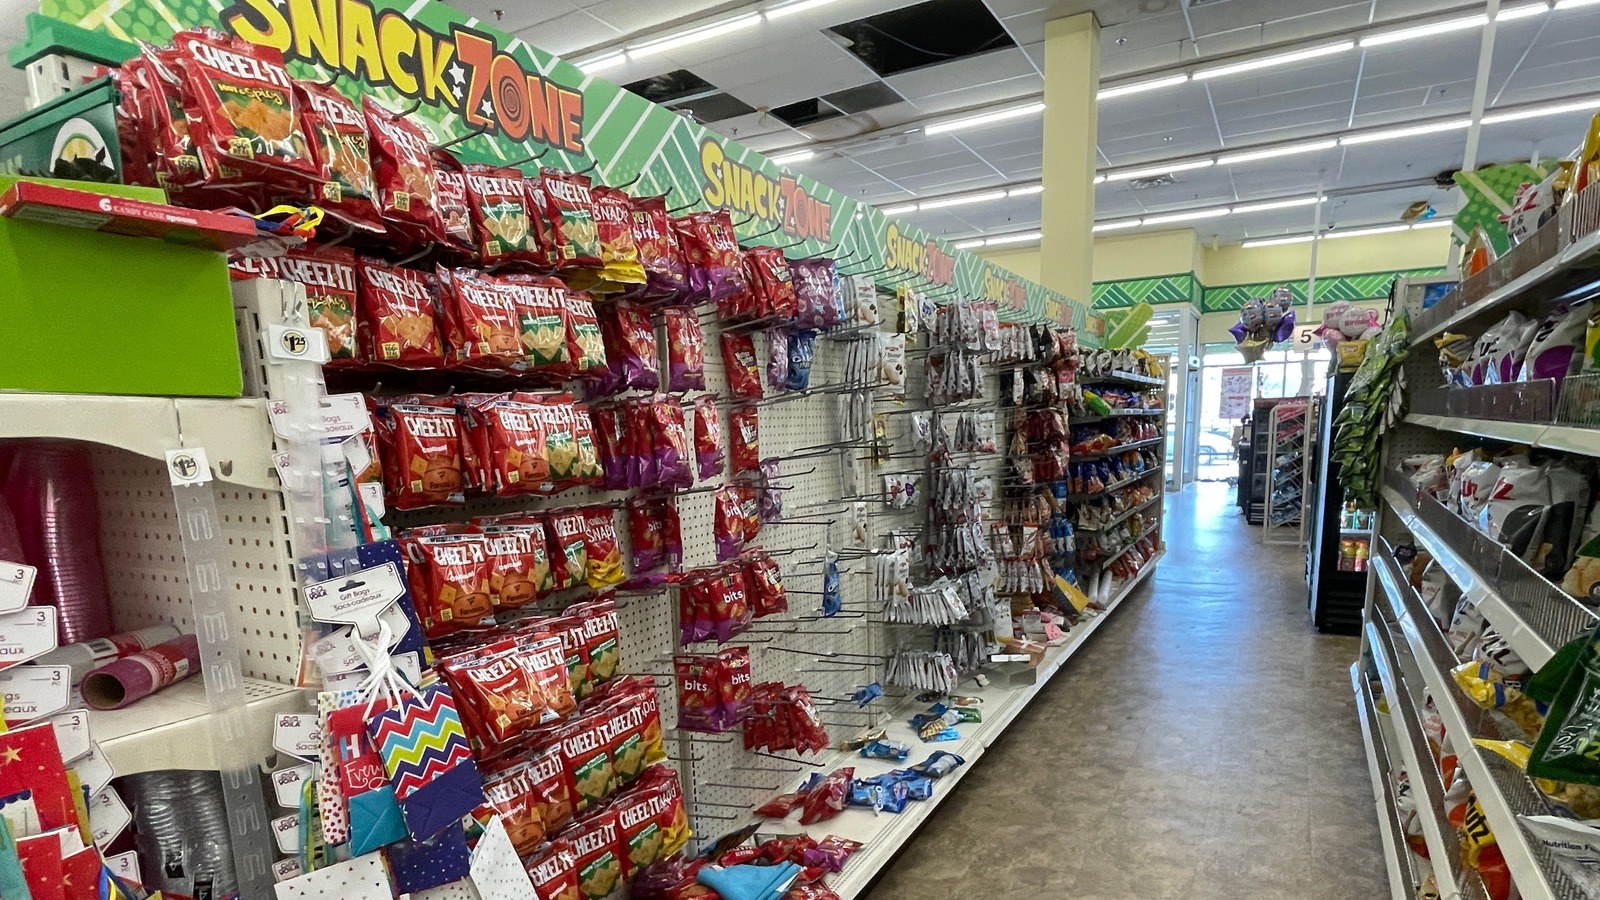 Dollar Tree Going Back to $1 or Less! Dollar Tree Finds YOU Should